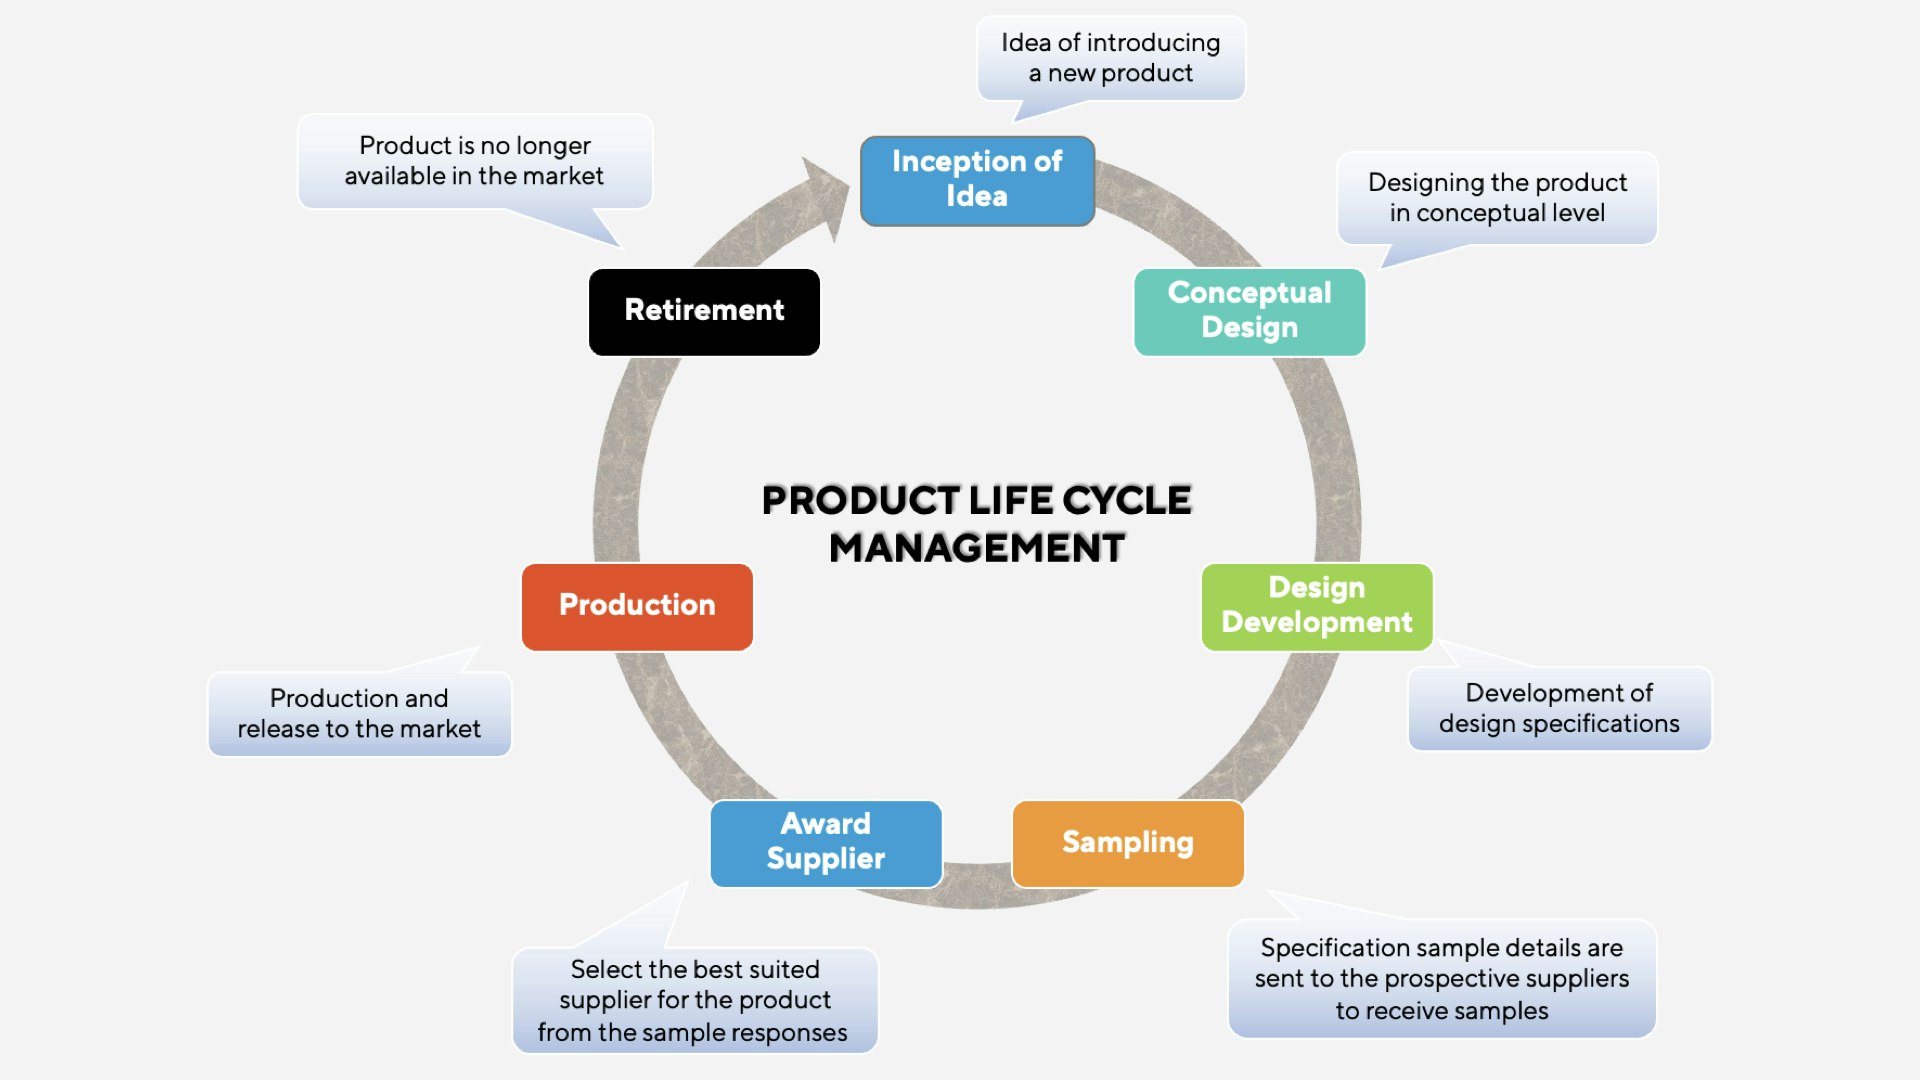 An illustration showing a product lifecycle from inception of idea over coneptual design over design development over sampling over award supplier over production over retirement.